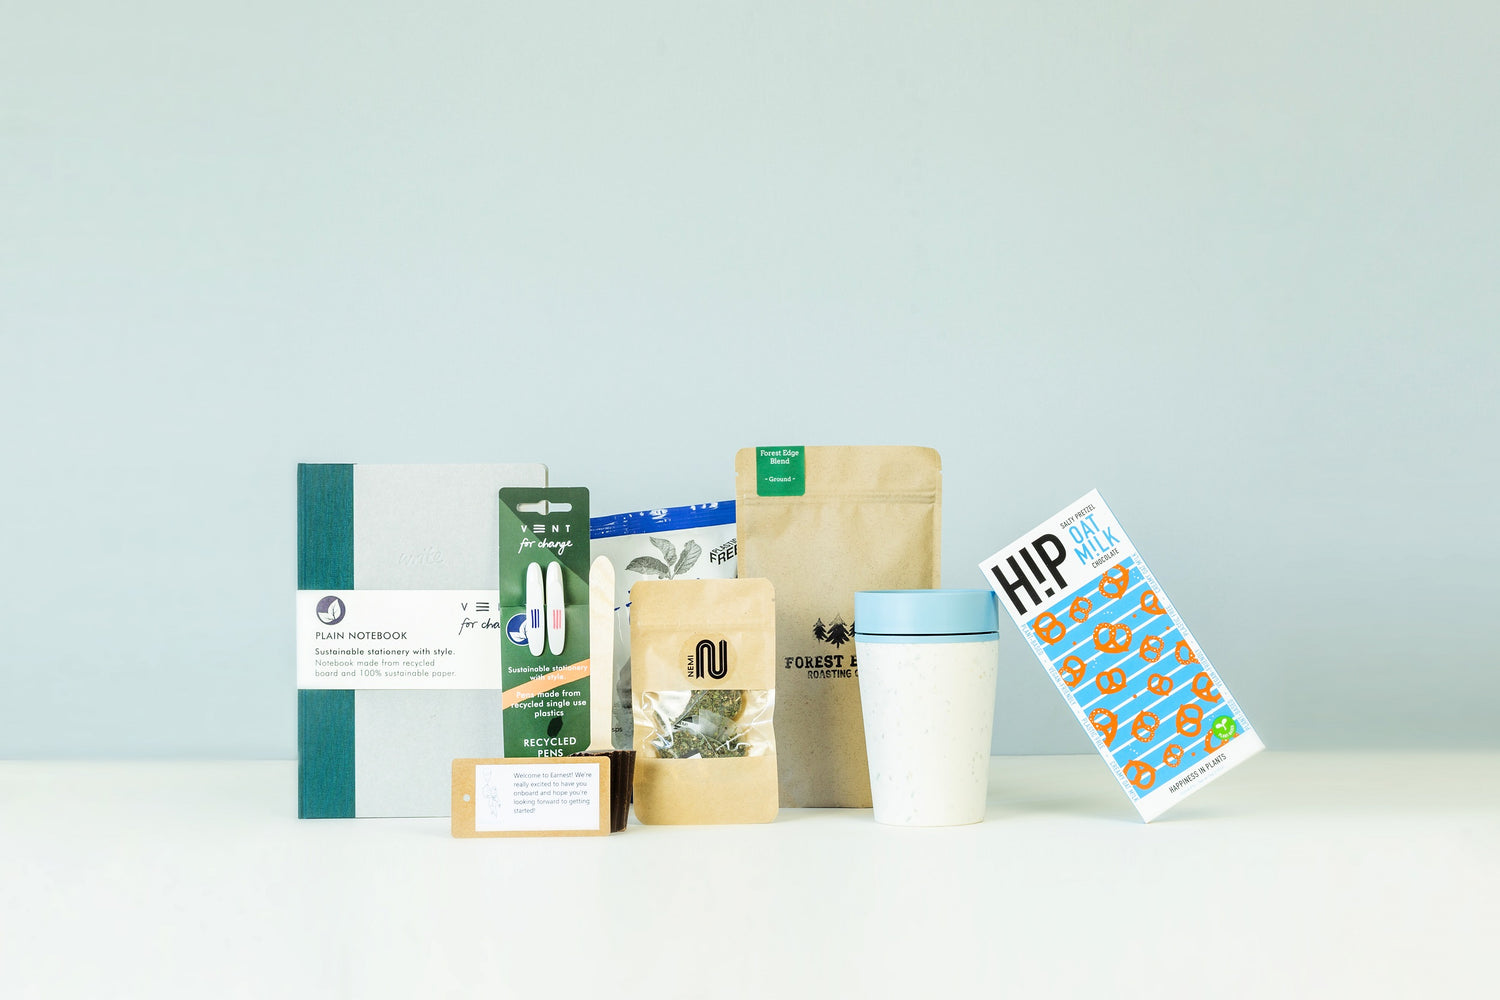 Gender Neutral Onboarding Gifts - image of contents of gift box including notebook, ground coffee, crisps, tea bags, pens, chocolate and keep cup